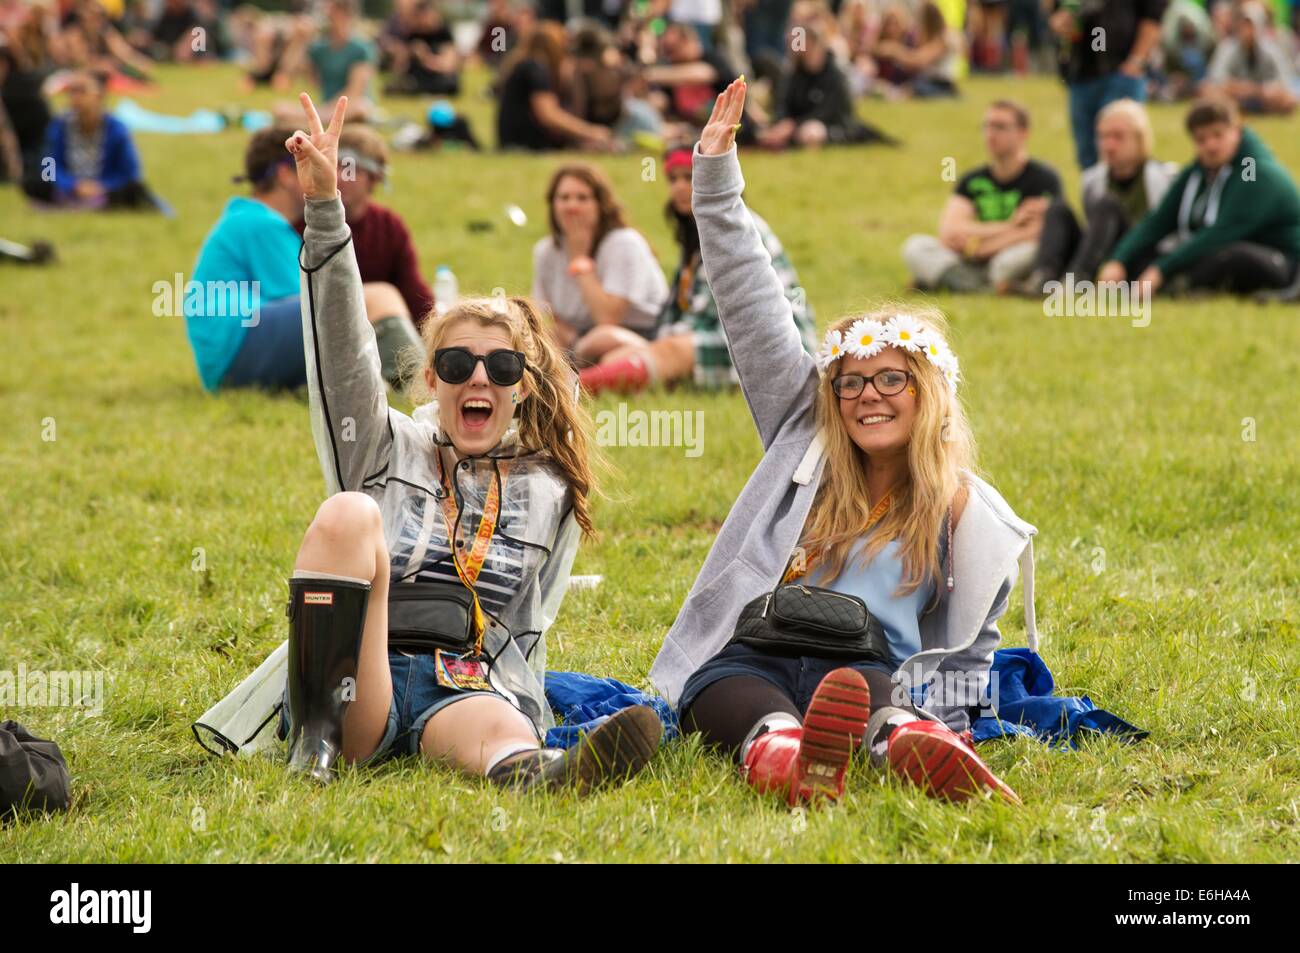 Leeds, UK. 23rd Aug, 2014. Festival goers enjoy the atmosphere during the second day of Leeds Festival at Bramham Park on August 23, 2014 in Leeds, United Kingdom Credit:  Sam Kovak/Alamy Live News Stock Photo